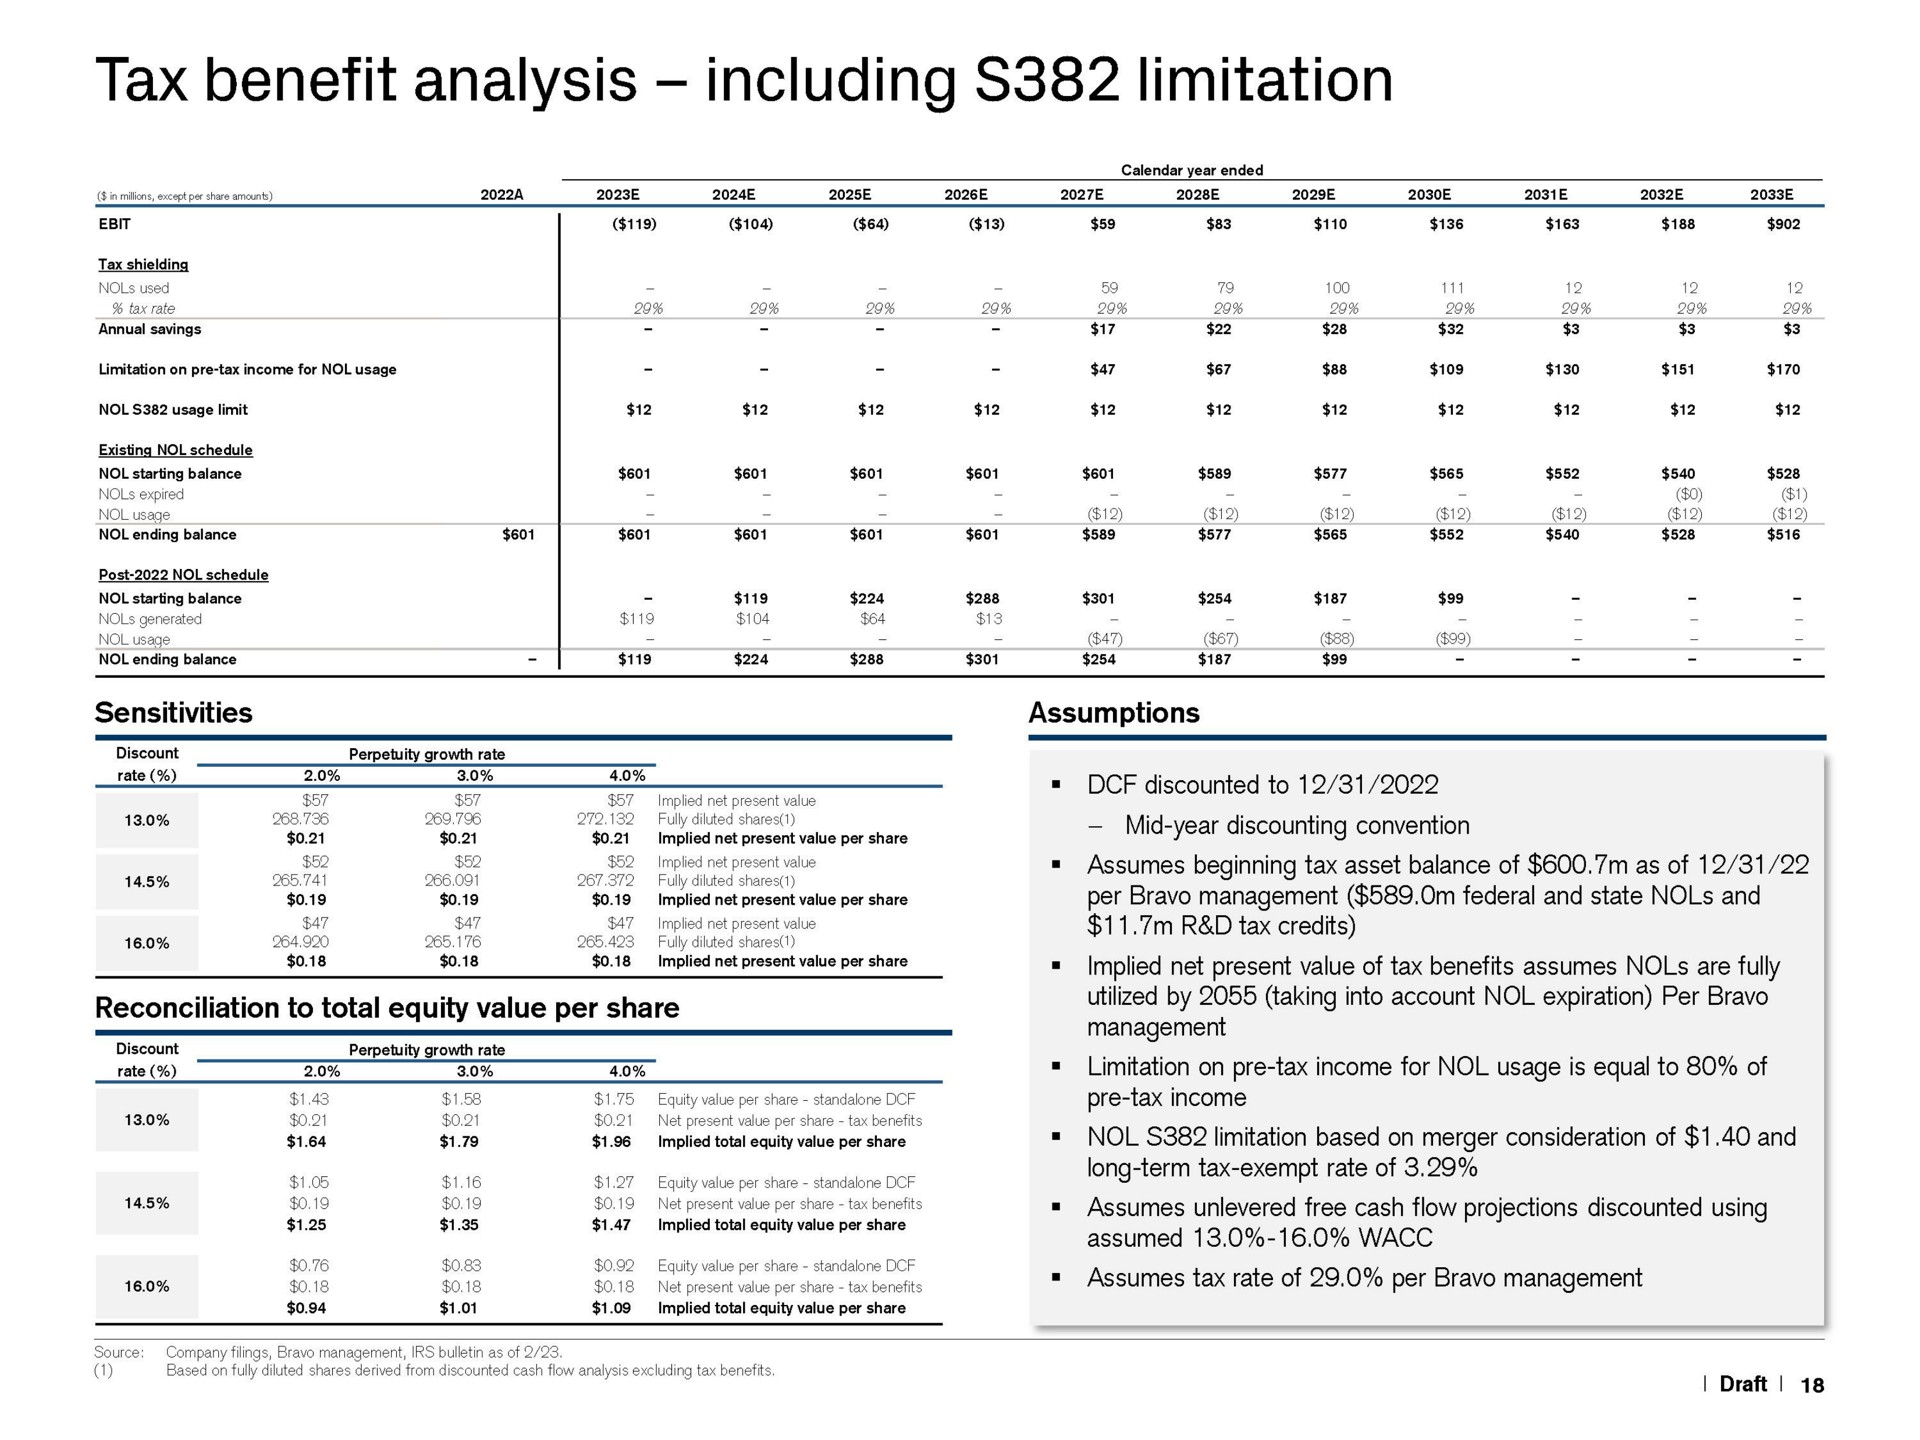 tax benefit analysis including limitation sensitivities discounted to assumed | Credit Suisse